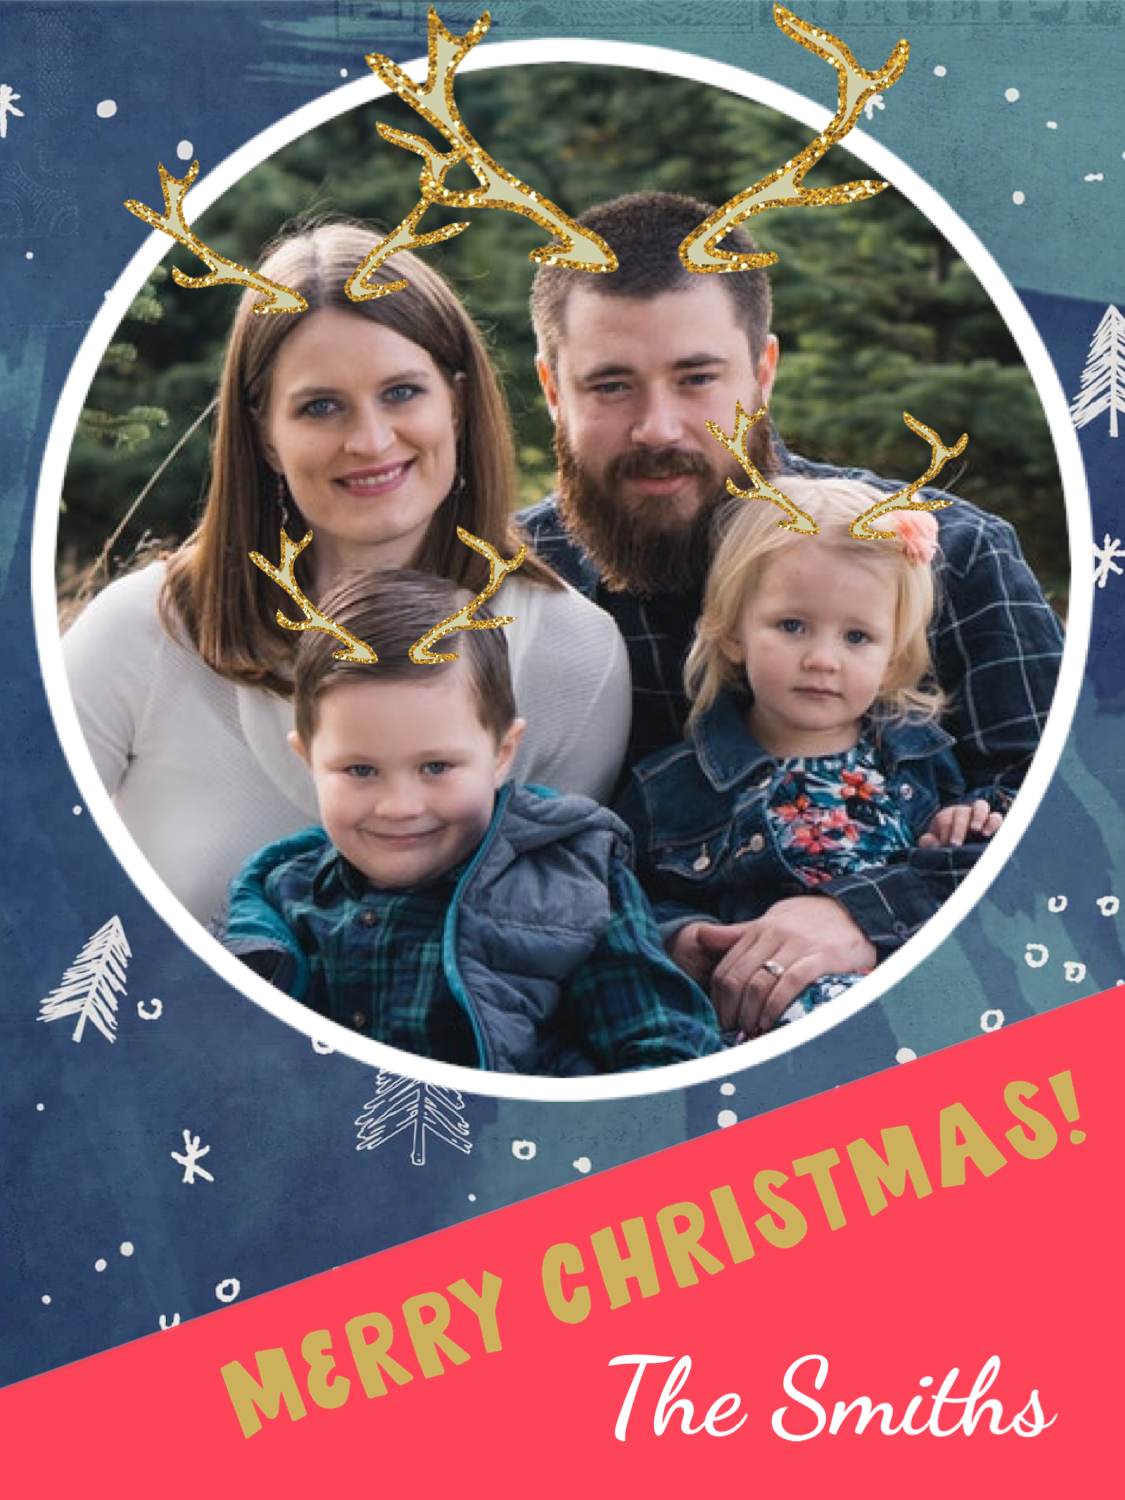 A Merry Christmas Card With A Photo Of A Family Template